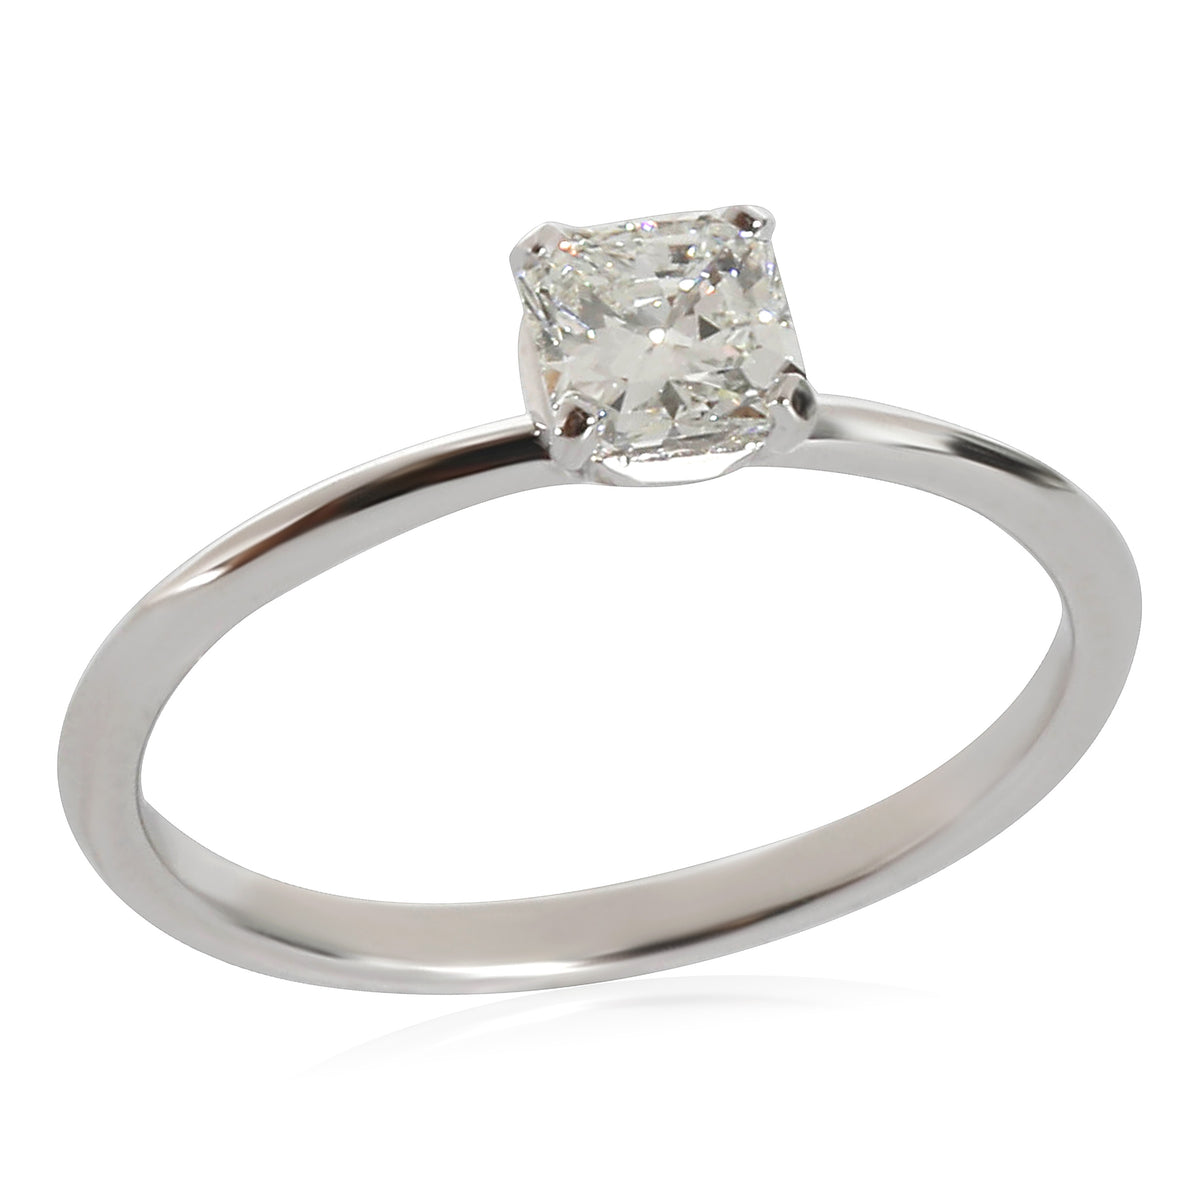 Tiffany & Co. Solitaire Engagement Ring in Platinum H VS1 0.54 CTW